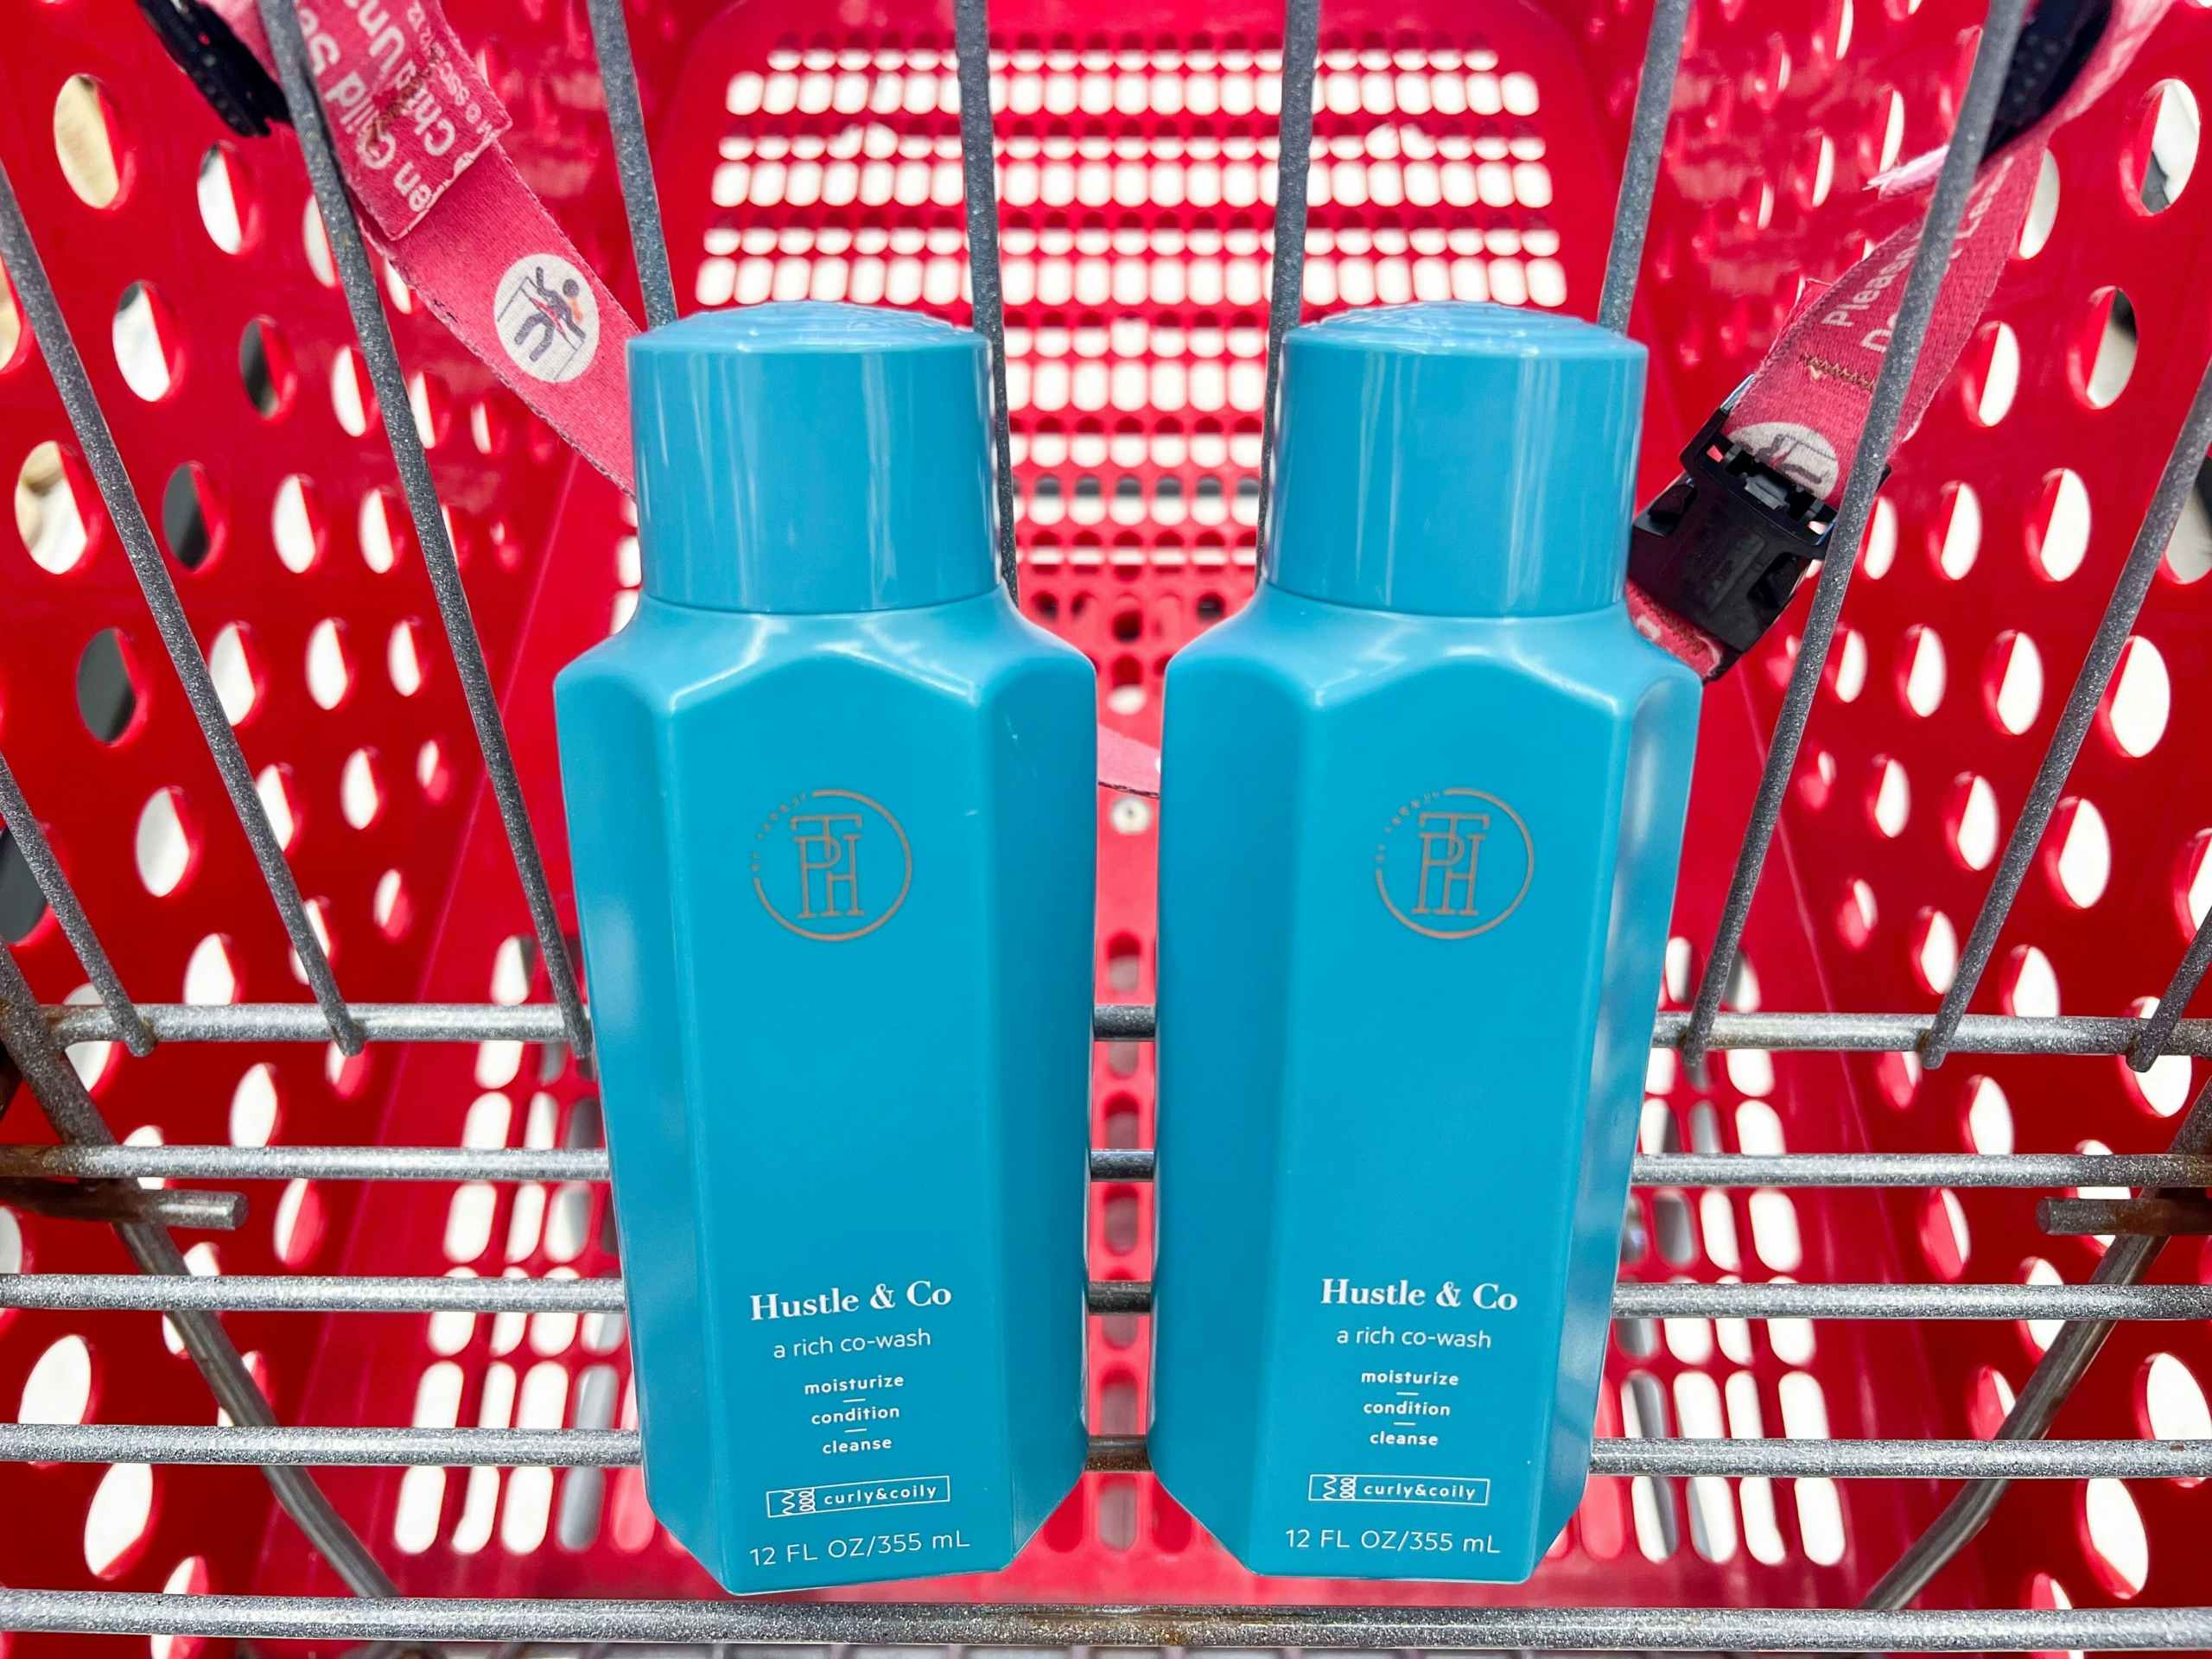 two bottles of tph hair care in cart